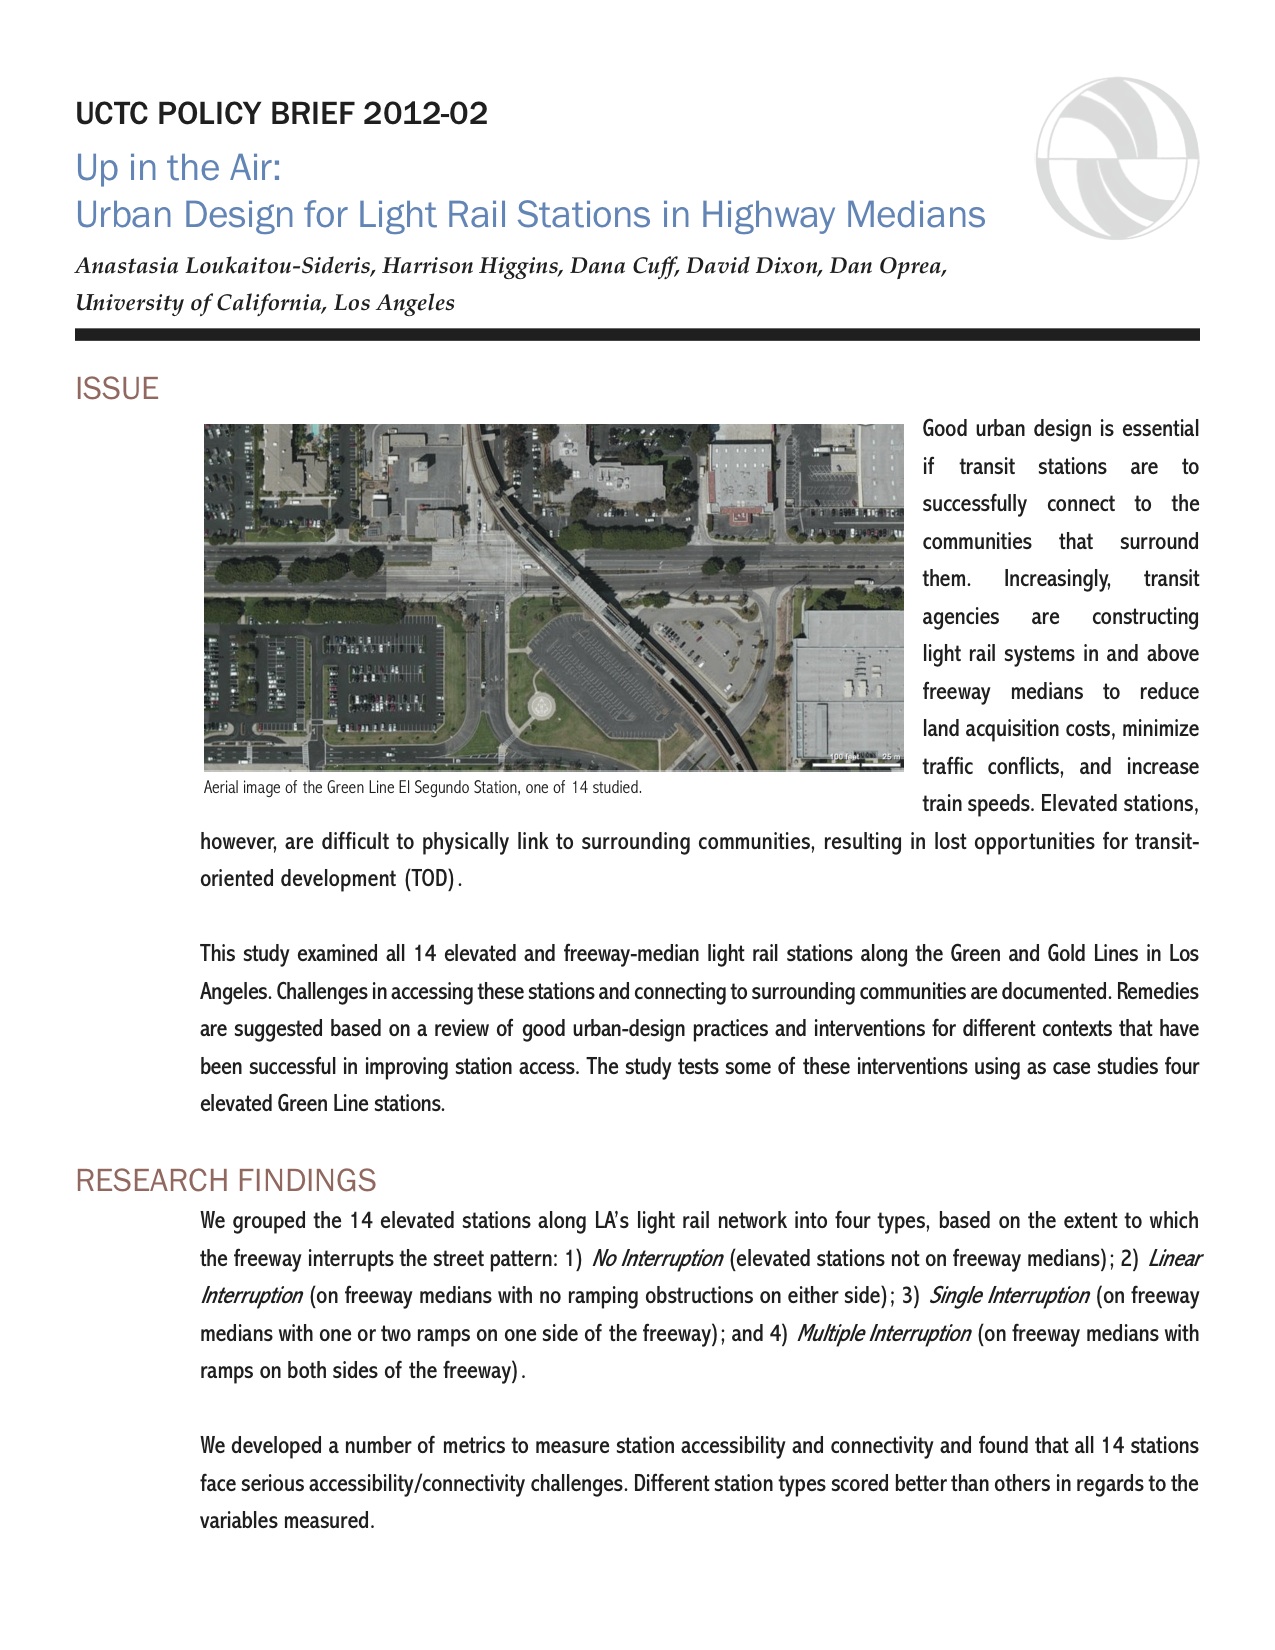 Up in the Air: Urban Design for Light Rail Stations in Highway Medians